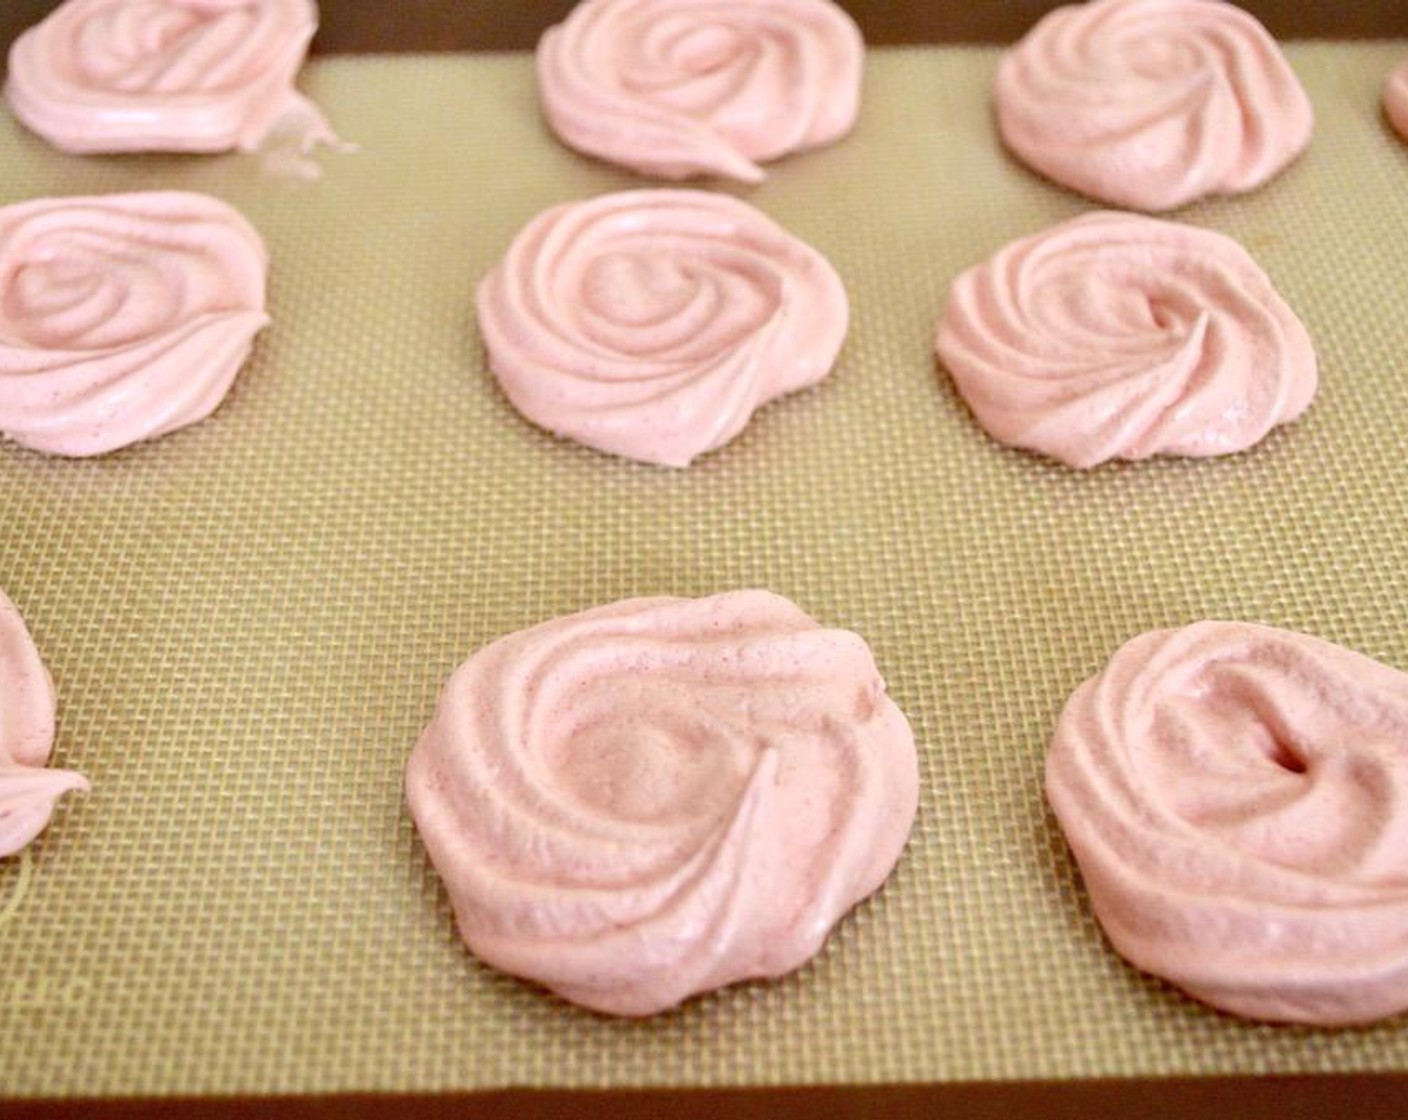 step 5 Bake the cookies for an hour and a half to basically dry the meringues on a low temperature. Turn off the heat and leave them in the oven for 8 hours to completely dry.